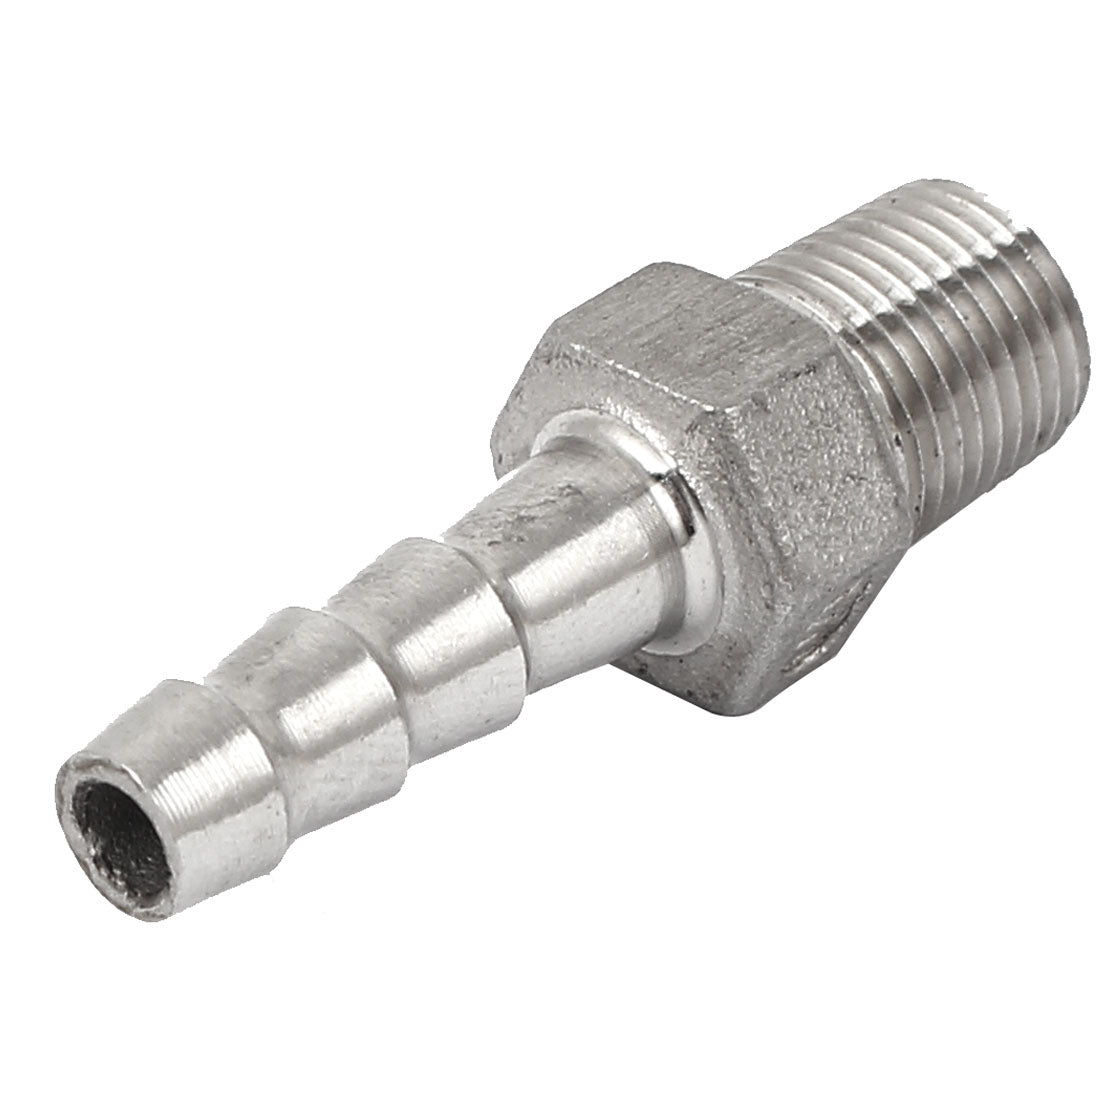 uxcell Uxcell 1/4BSP Male Thread to 6mm Hose Barb Straight Quick Fitting Adapter Connector